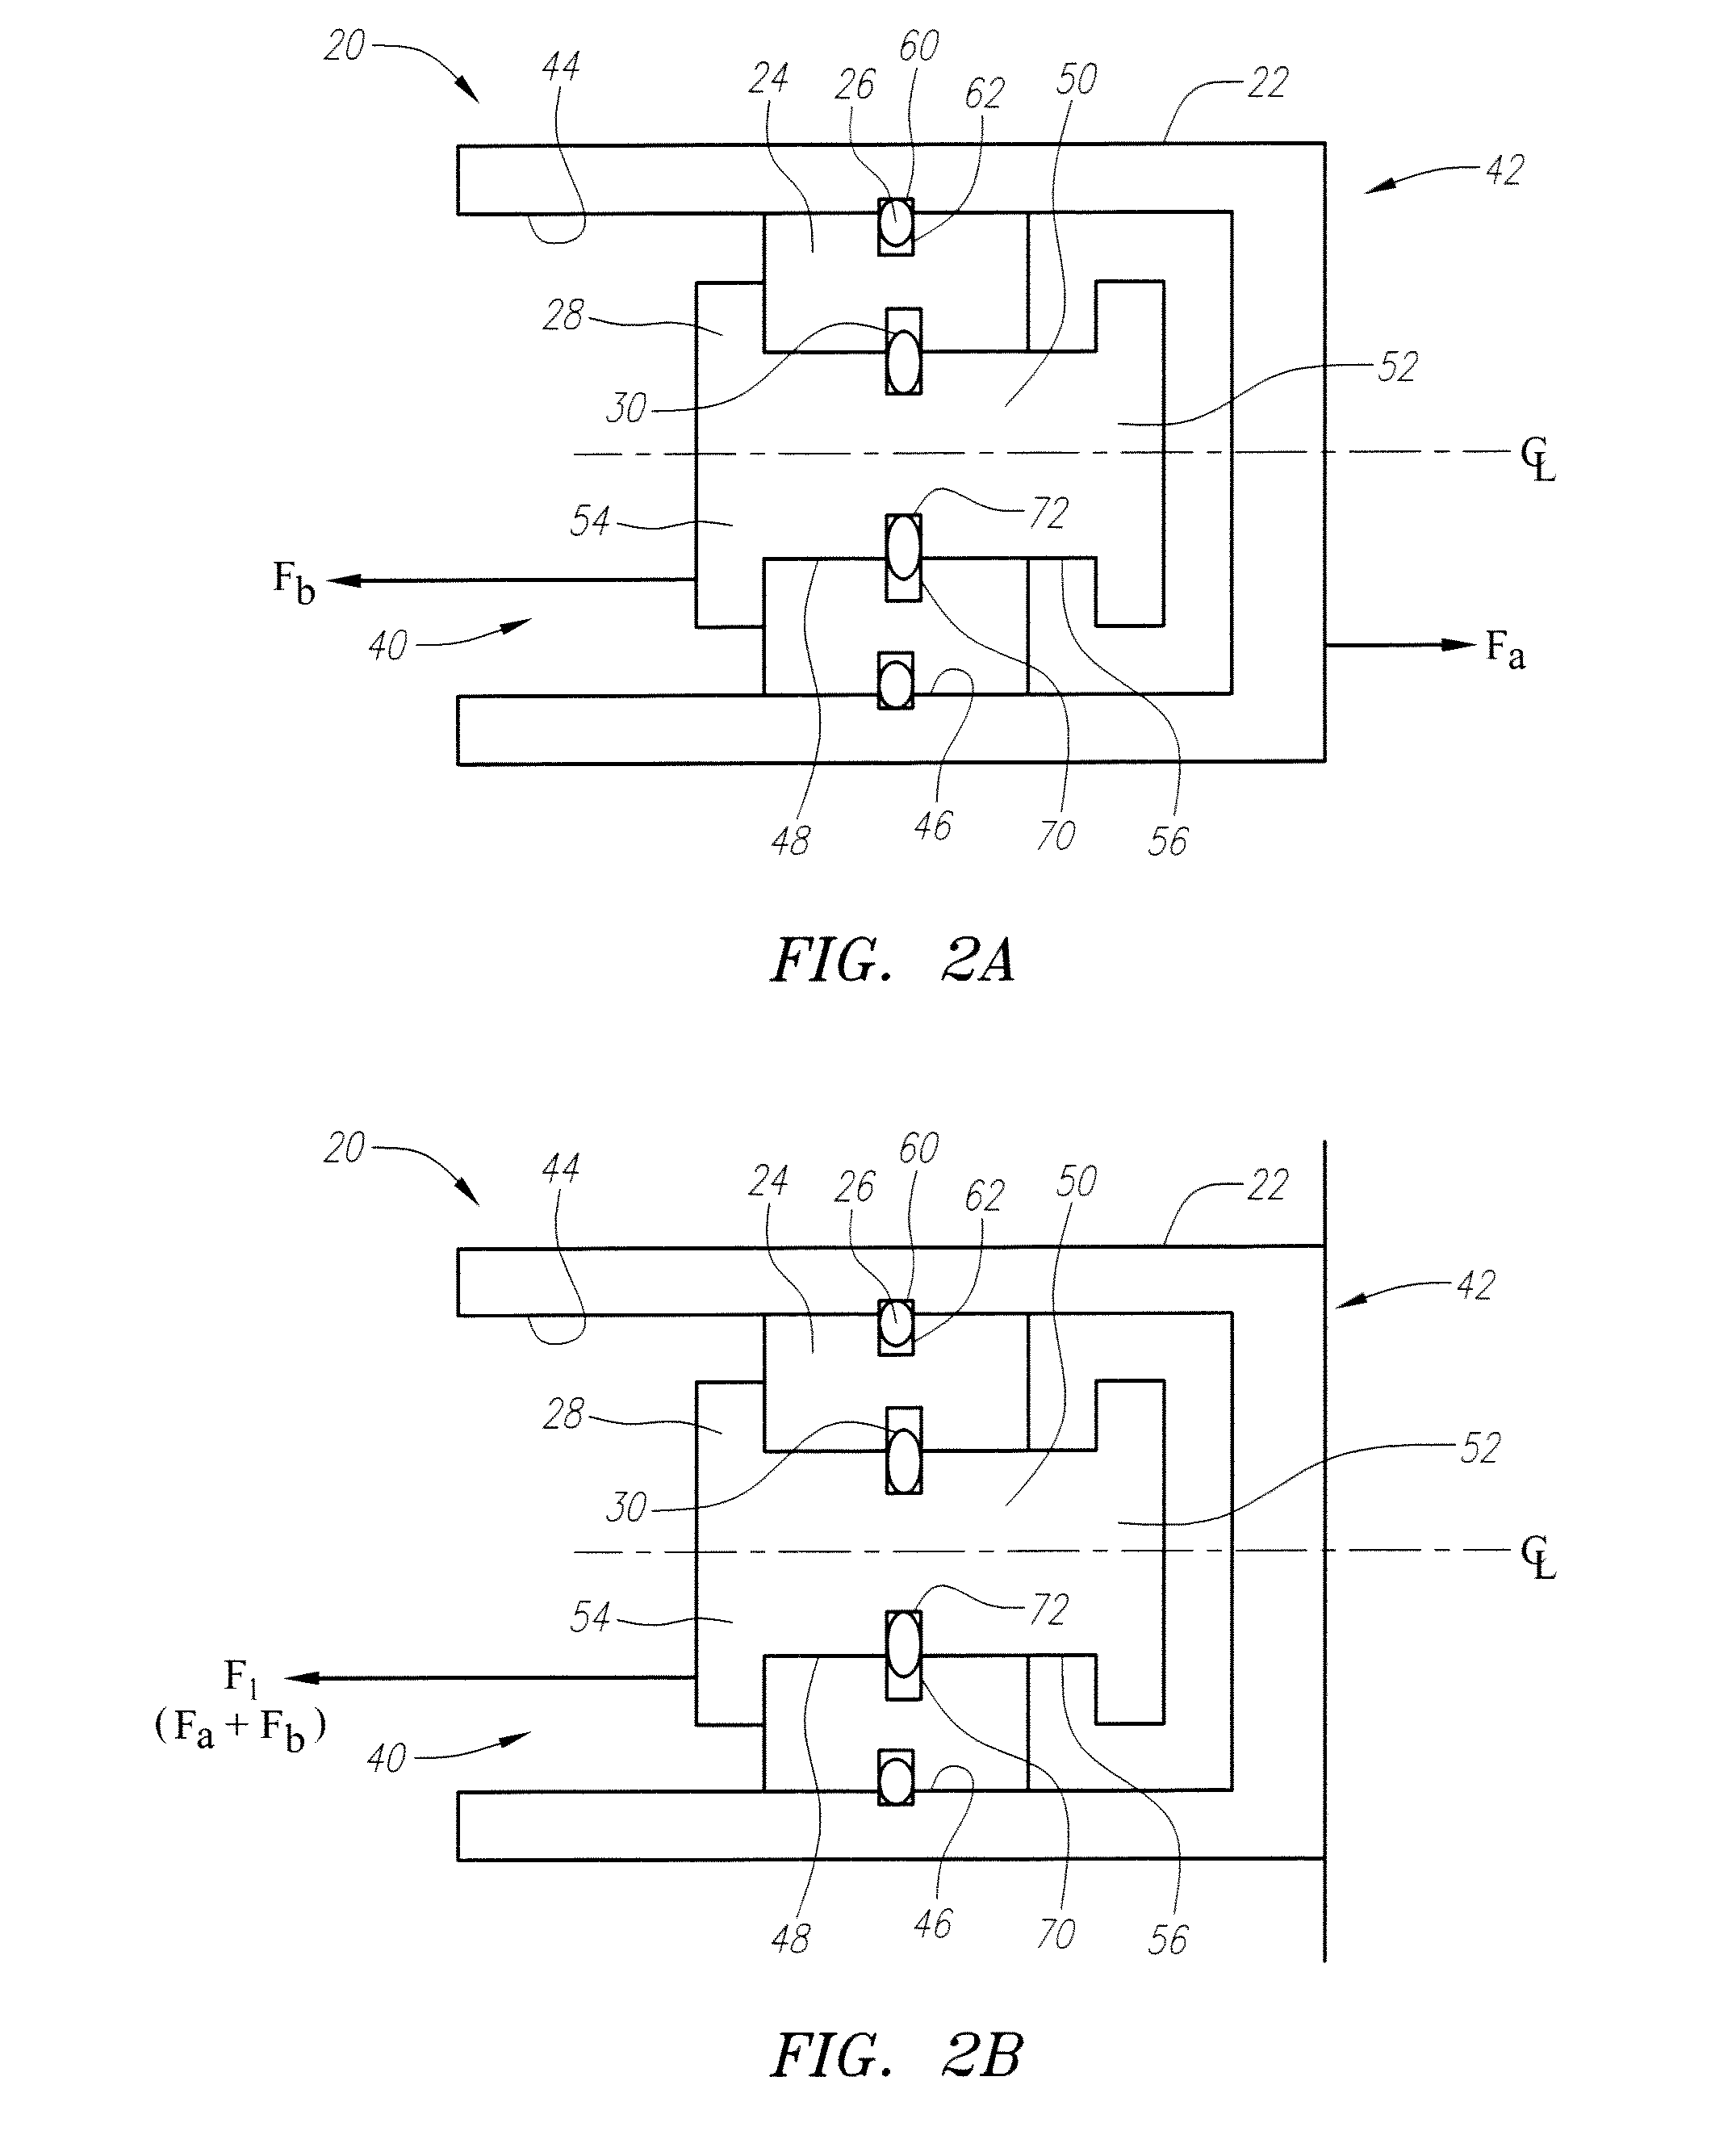 Multi-stage engagement assemblies and related methods